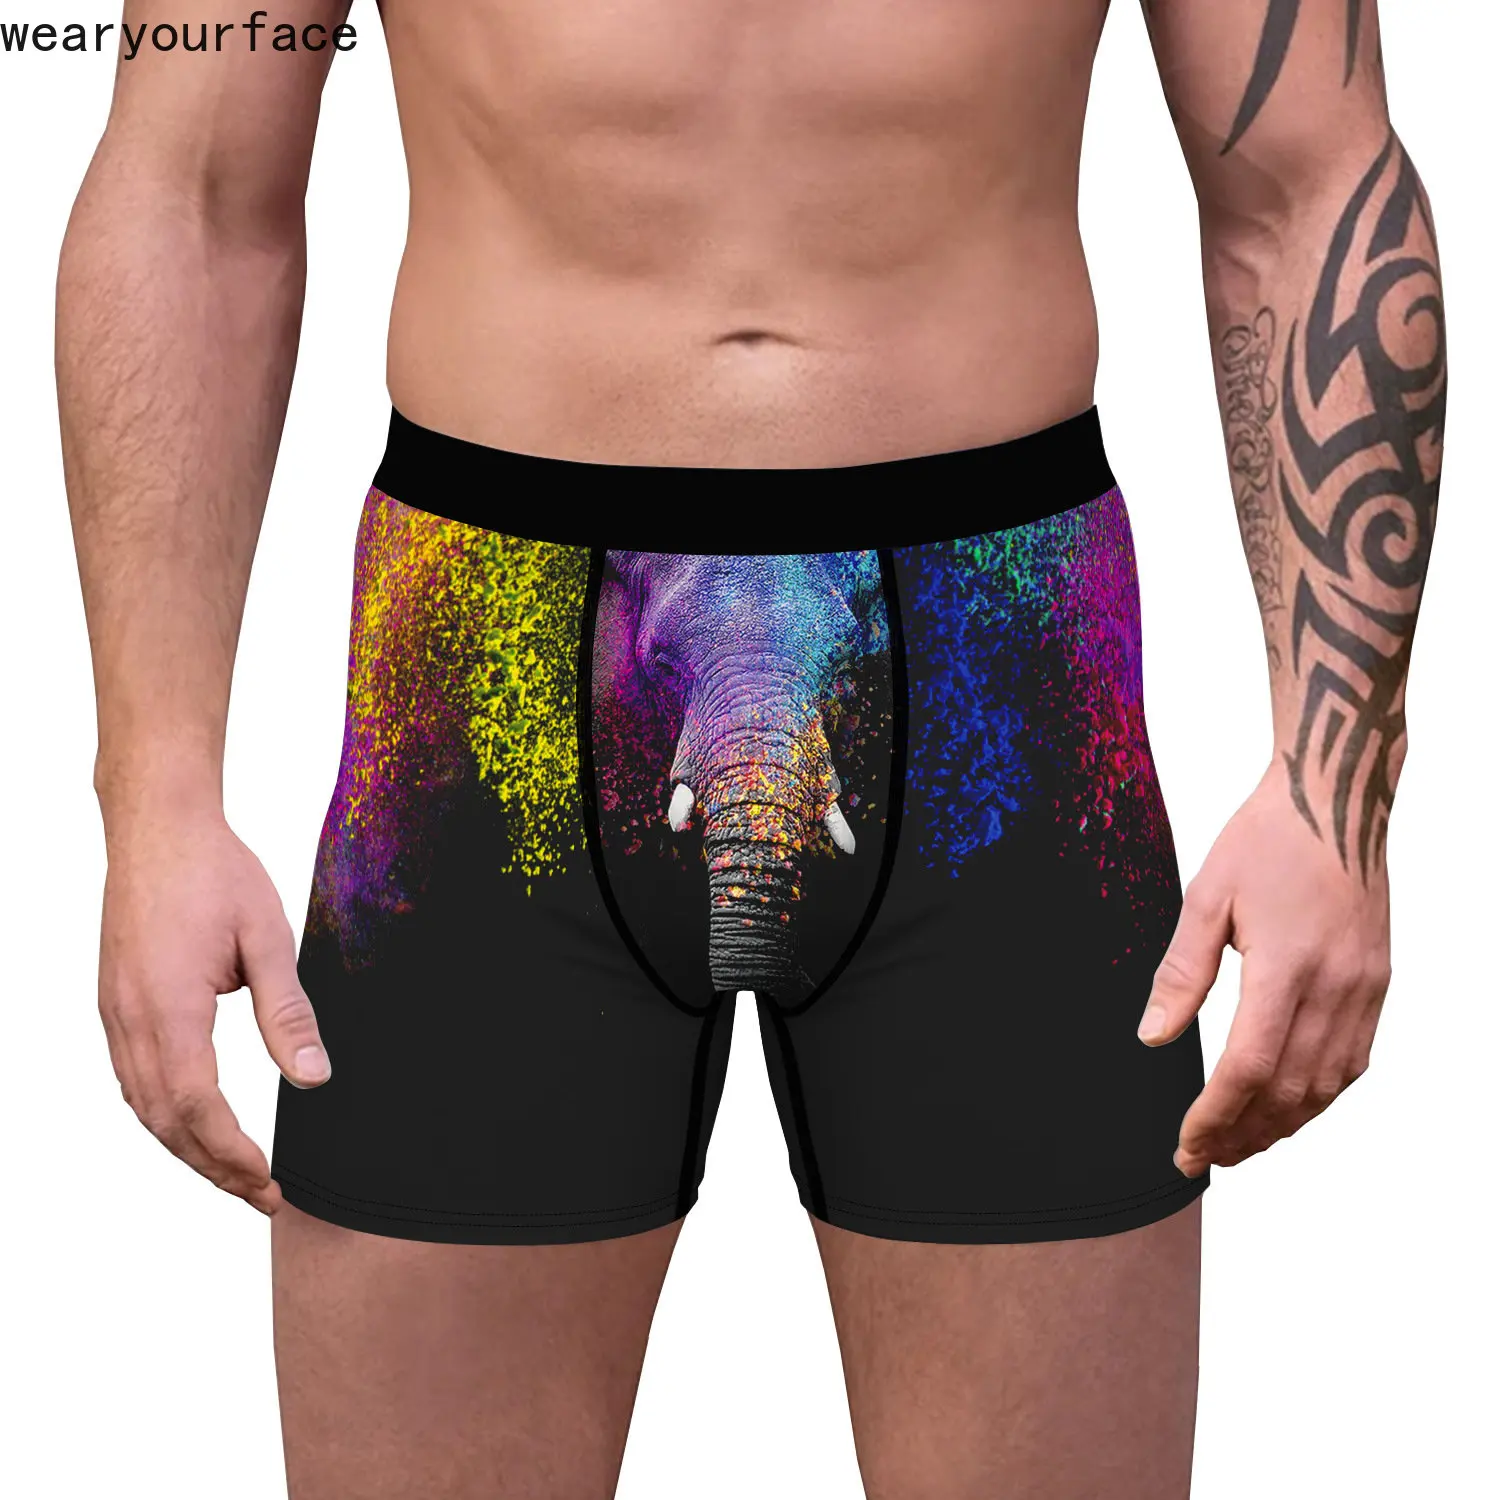 

Colorful Big Elephant Sexy Lips 3D Printed Men Pouch Boxers Panties Comfort Underwear Skin-friendly Funny Summer Panty Intimates